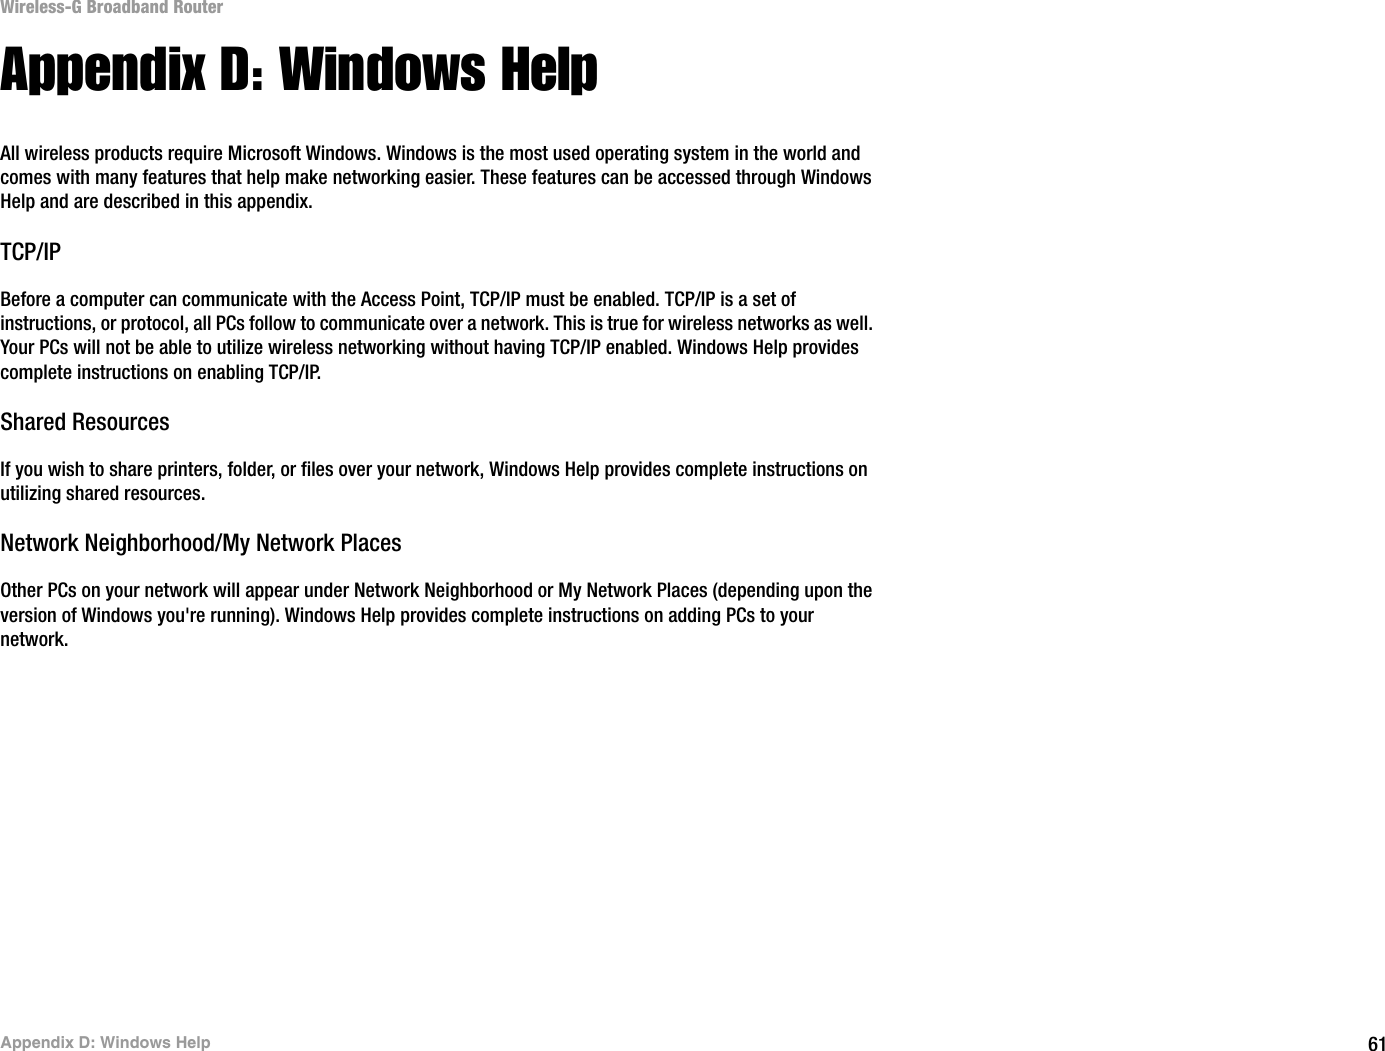 61Appendix D: Windows HelpWireless-G Broadband RouterAppendix D: Windows HelpAll wireless products require Microsoft Windows. Windows is the most used operating system in the world and comes with many features that help make networking easier. These features can be accessed through Windows Help and are described in this appendix.TCP/IPBefore a computer can communicate with the Access Point, TCP/IP must be enabled. TCP/IP is a set of instructions, or protocol, all PCs follow to communicate over a network. This is true for wireless networks as well. Your PCs will not be able to utilize wireless networking without having TCP/IP enabled. Windows Help provides complete instructions on enabling TCP/IP.Shared ResourcesIf you wish to share printers, folder, or files over your network, Windows Help provides complete instructions on utilizing shared resources.Network Neighborhood/My Network PlacesOther PCs on your network will appear under Network Neighborhood or My Network Places (depending upon the version of Windows you&apos;re running). Windows Help provides complete instructions on adding PCs to your network.